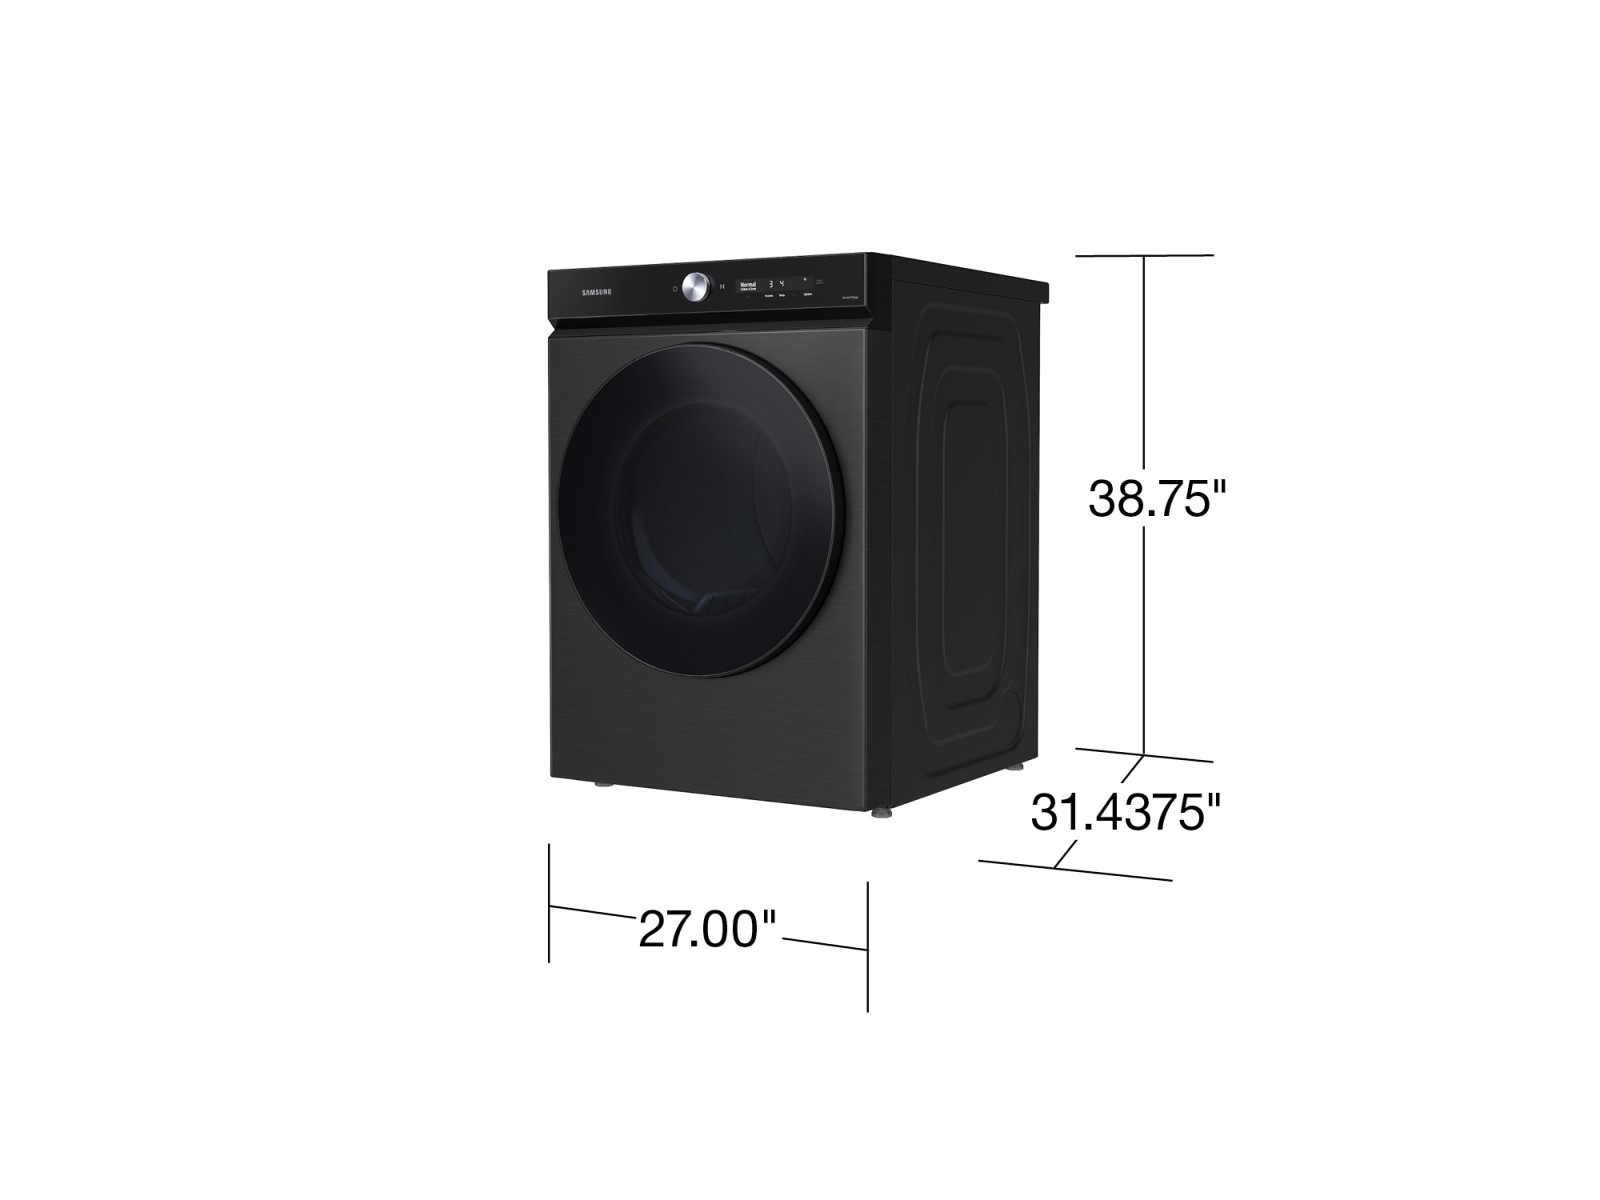 Thumbnail image of Bespoke 7.6 cu. ft. Ultra Capacity Electric Dryer with Super Speed Dry and AI Smart Dial in Brushed Black